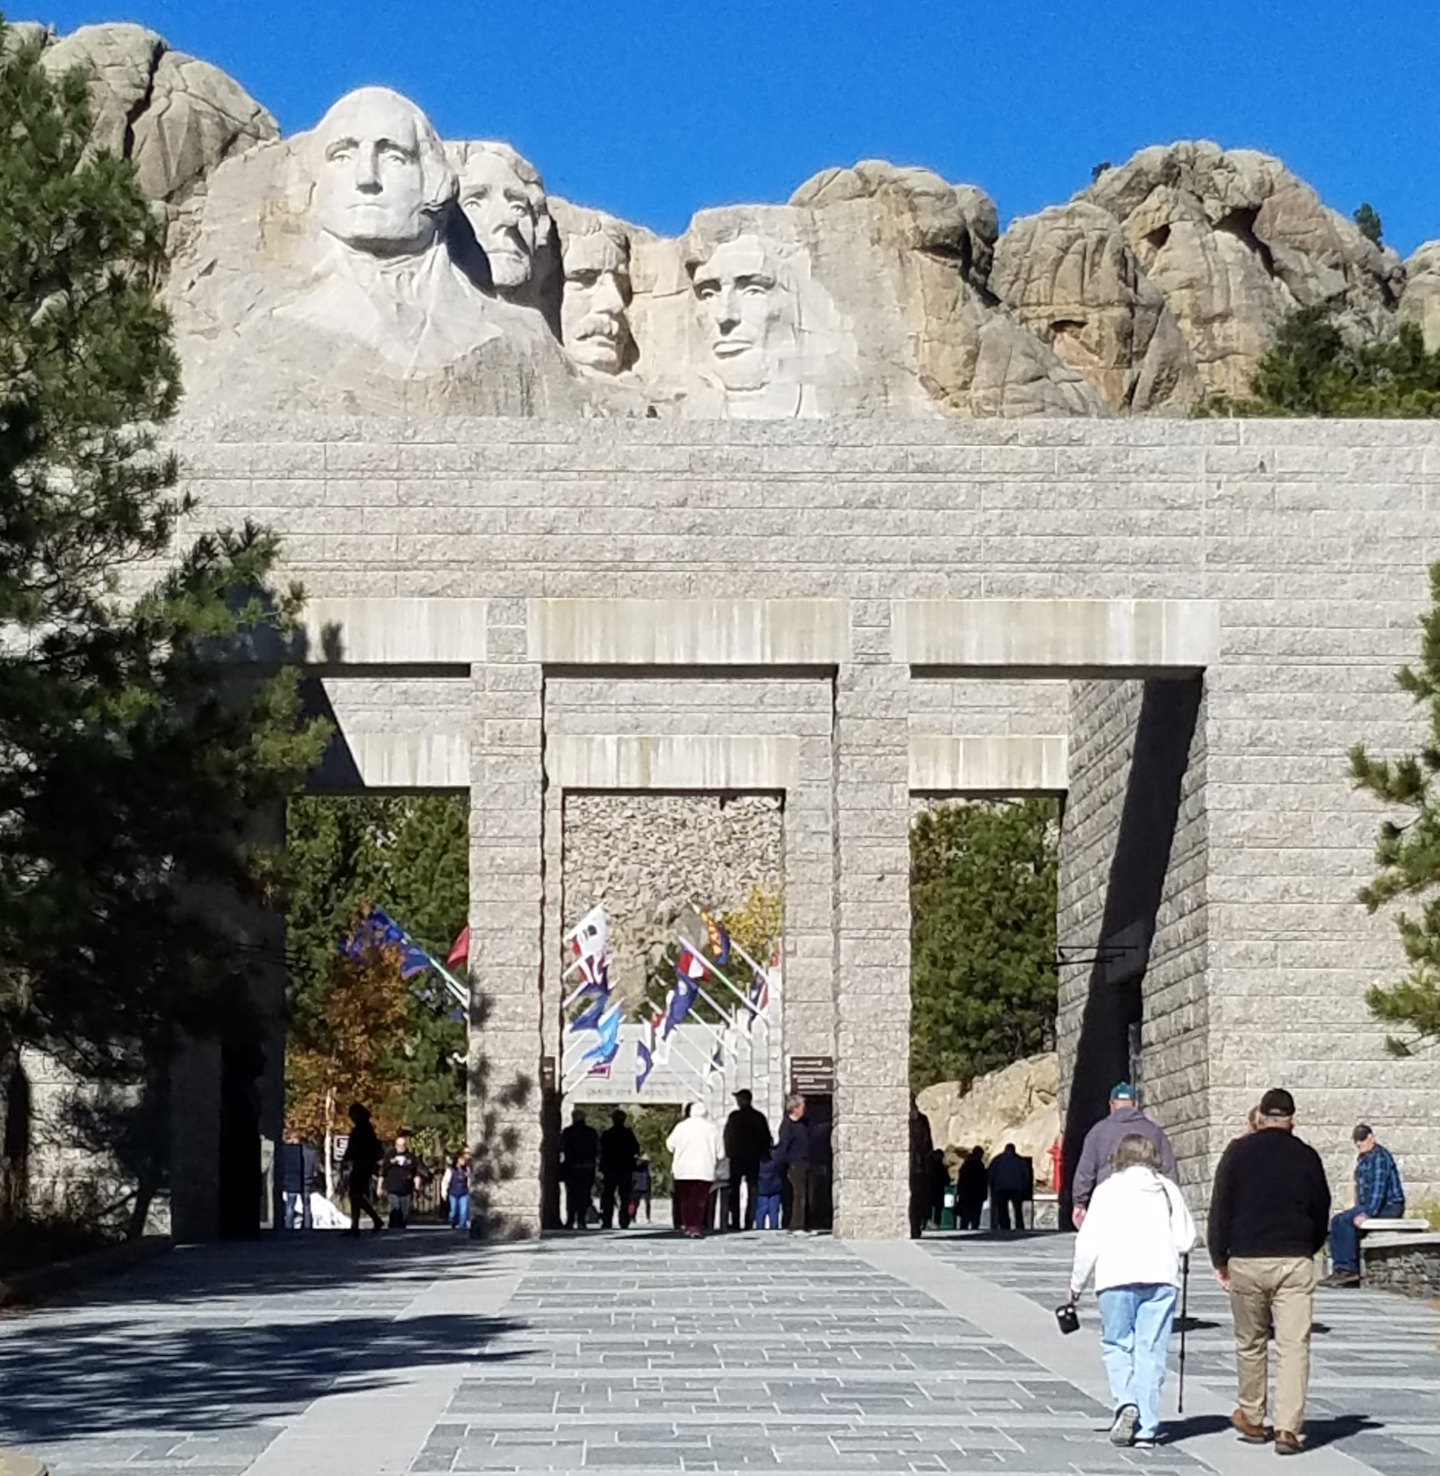 The Great Gate of Rushmore